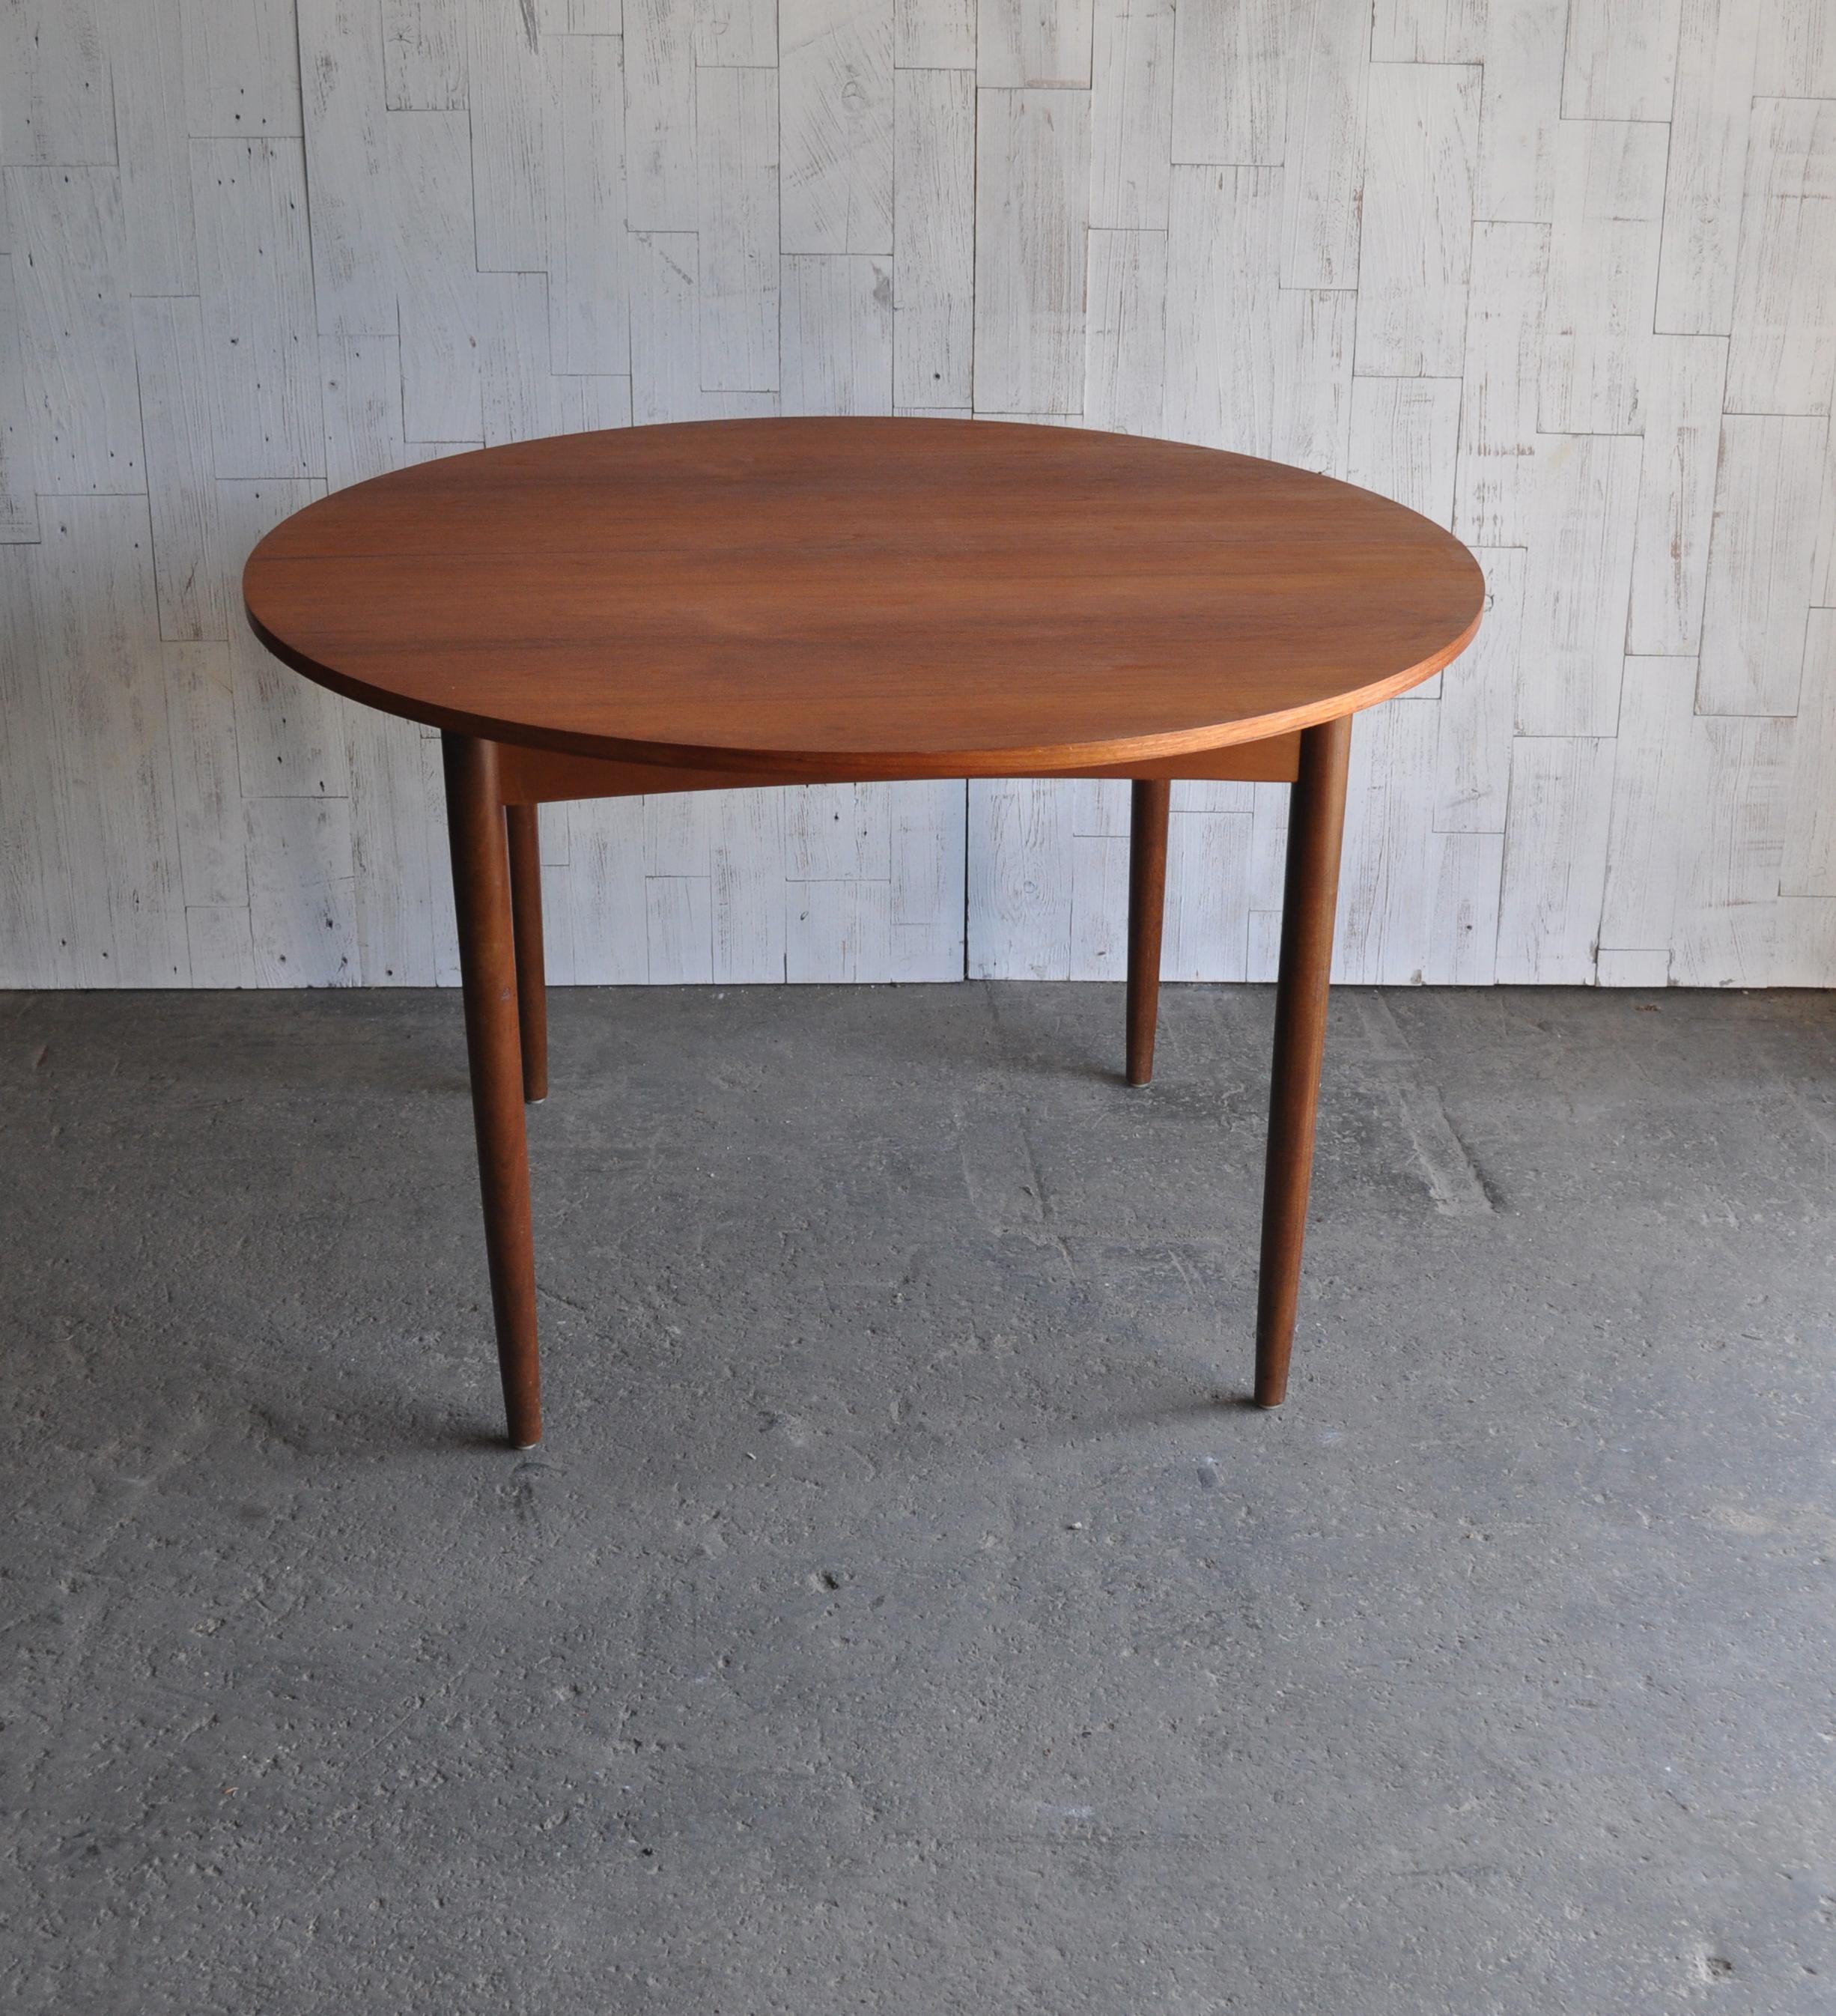 Vintage, midcentury, Scandinavian Modern
This vintage item is in very good condition
1960s original G Plan E Gomme vintage midcentury round extending dining table
Dimensions: D 122 (152 extended) x H 73 cm.